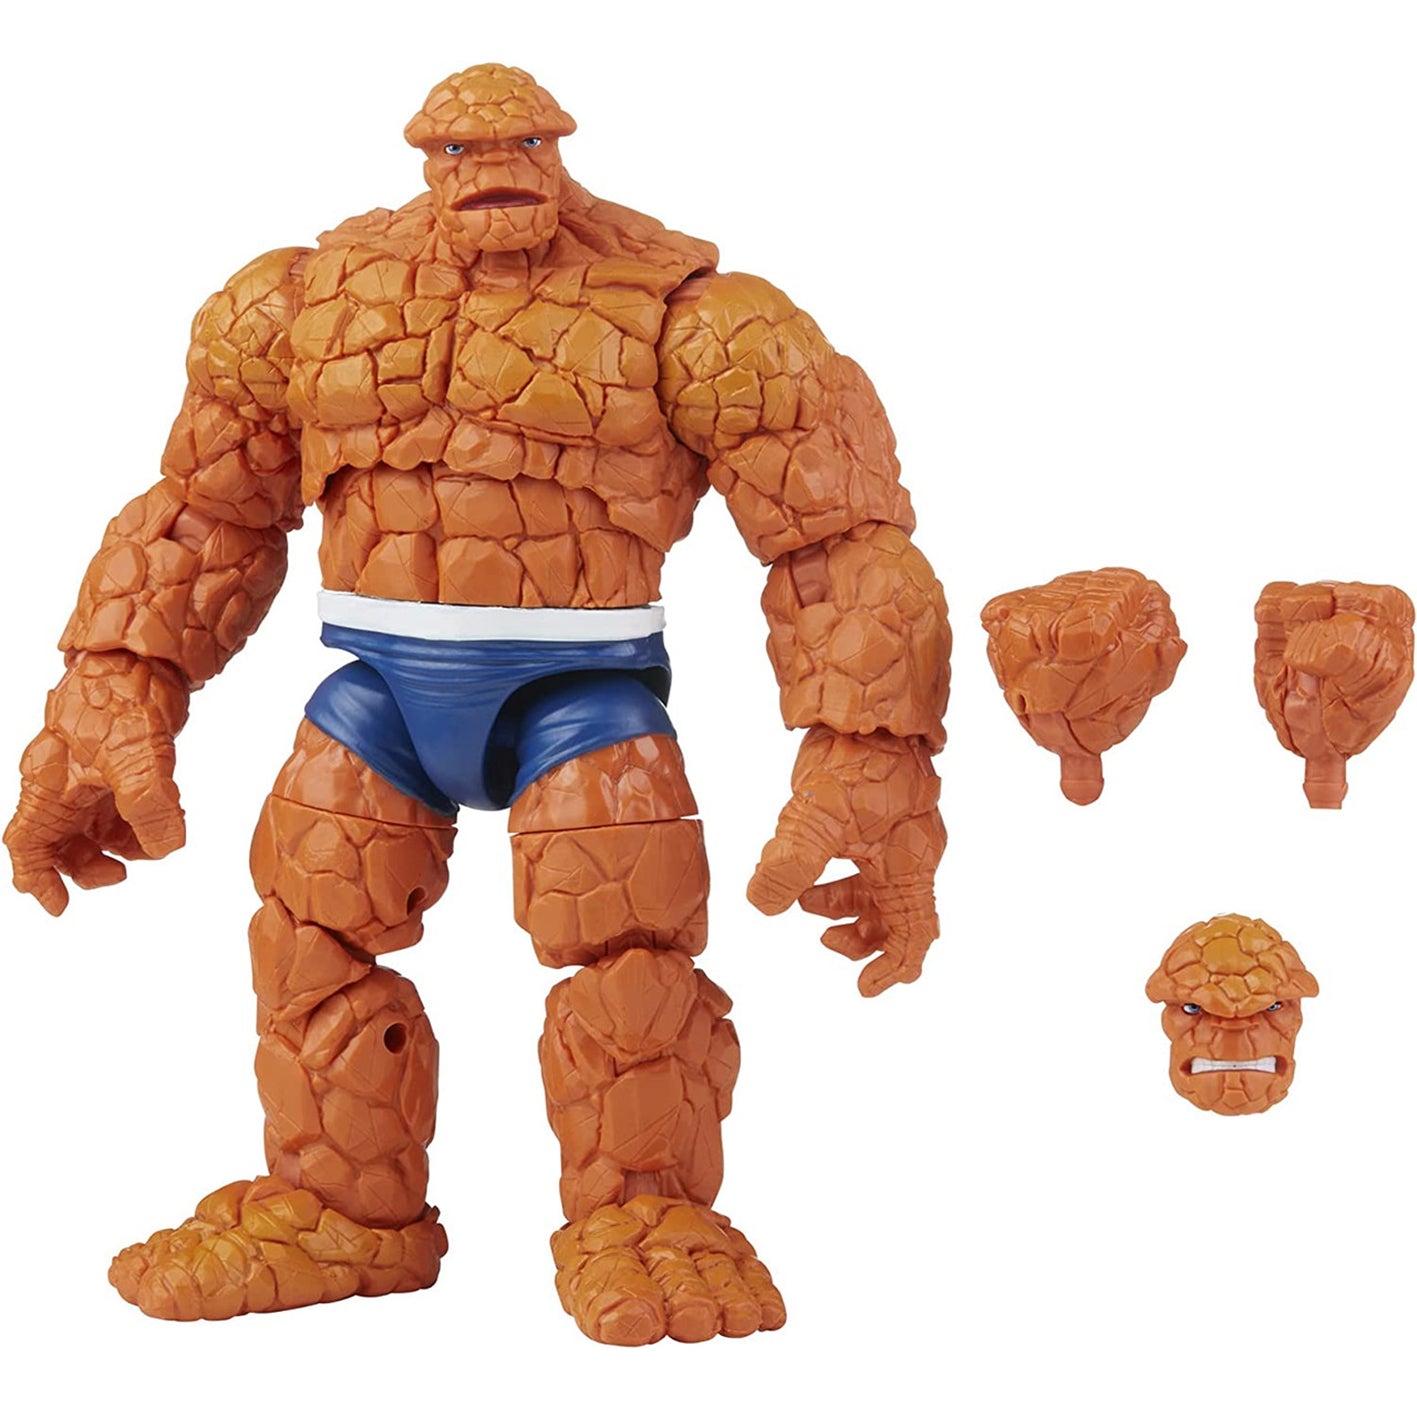 The Thing Marvel Legends Fantastic Four Retro Collection